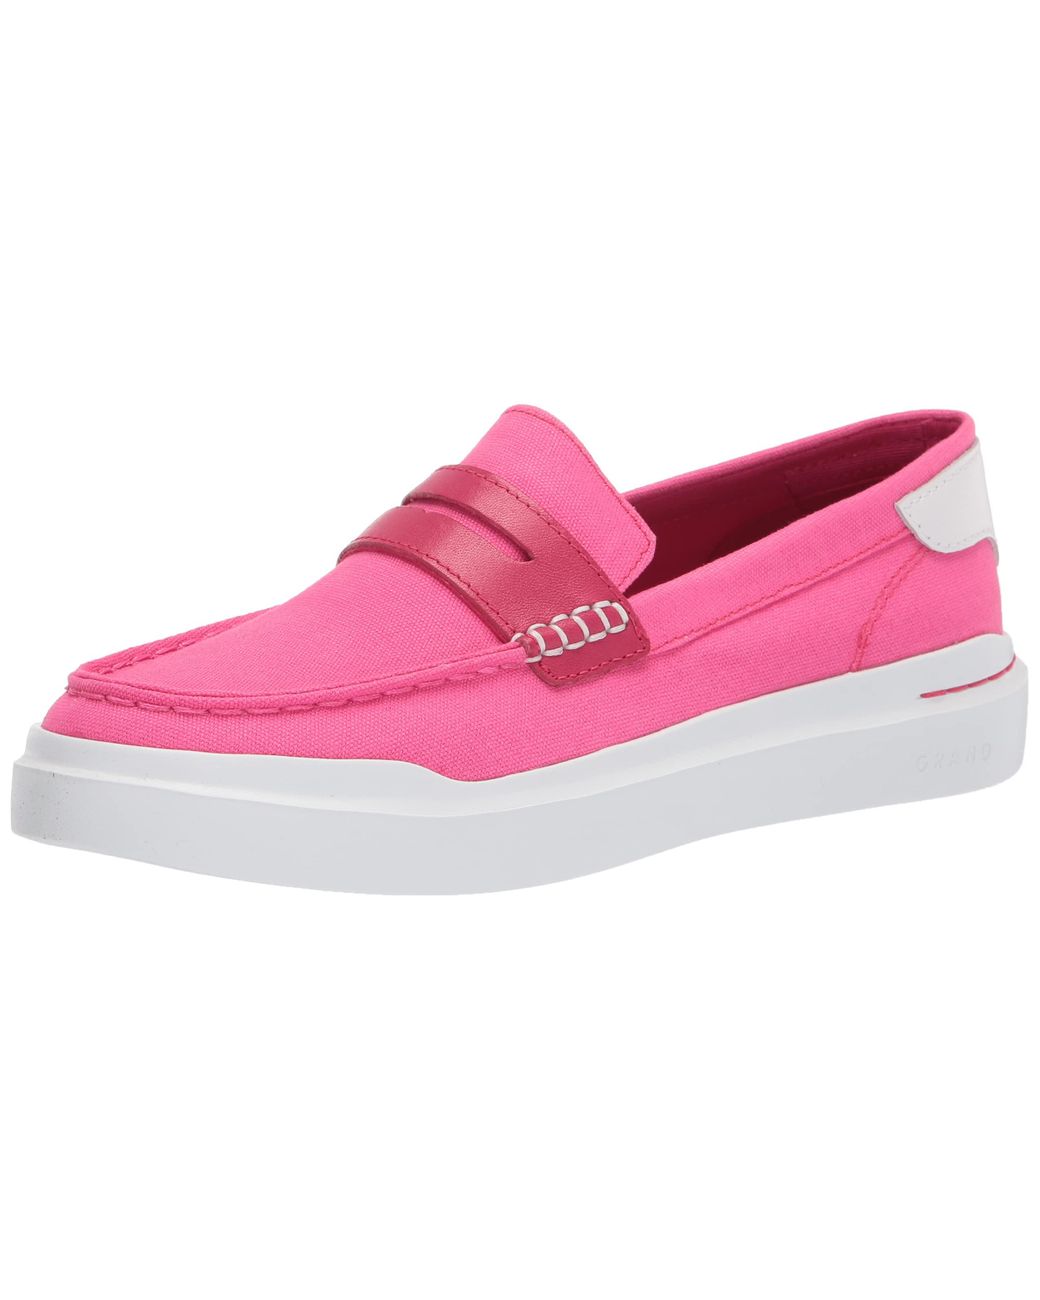 Cole Haan Grandpro Rally Canvas Penny Loafer Sneaker in Pink | Lyst